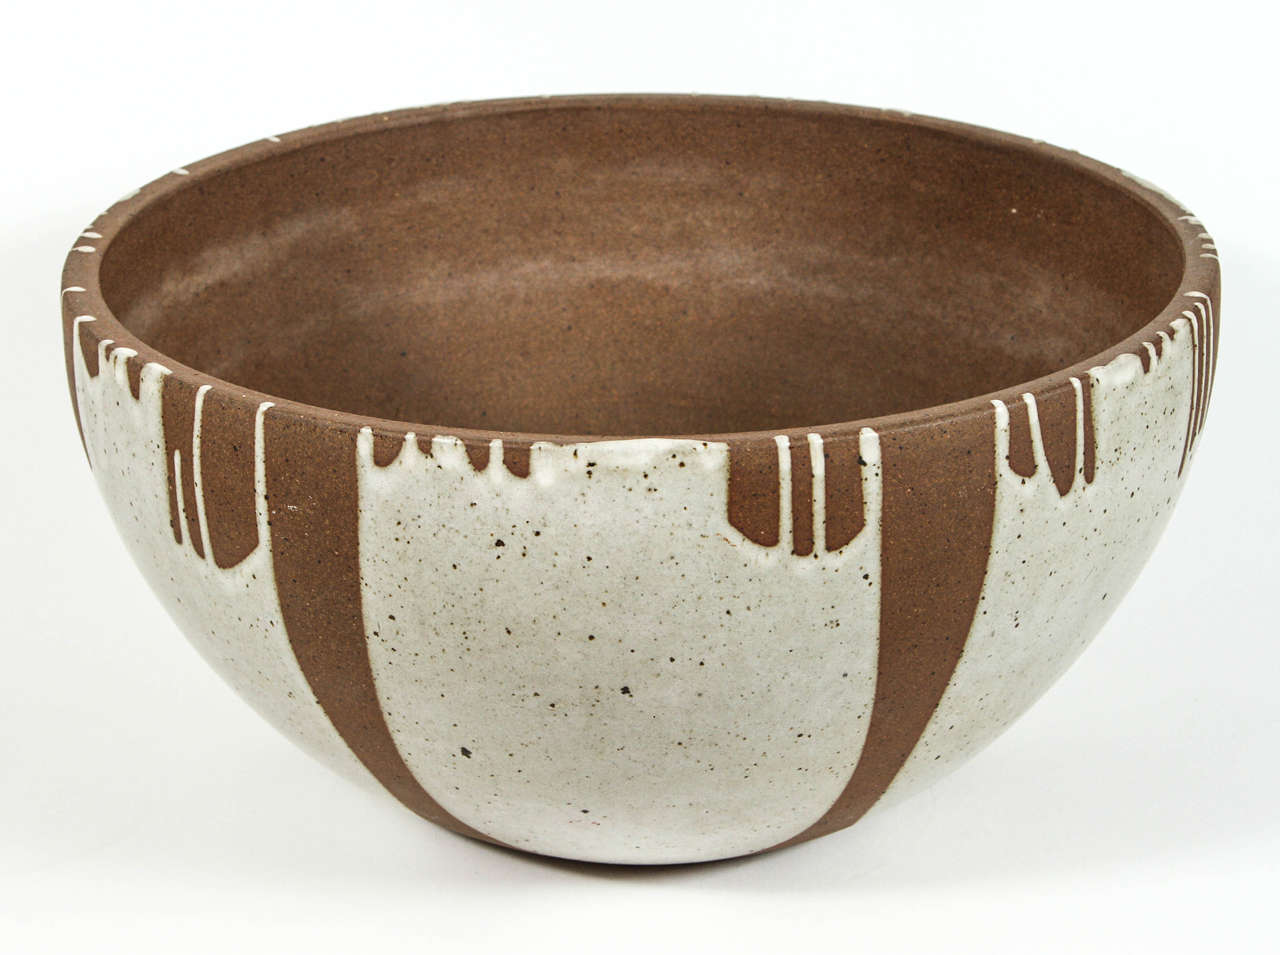 4080 planter in stone white flame glaze by David Cressey for Architectural Pottery, circa 1970s.